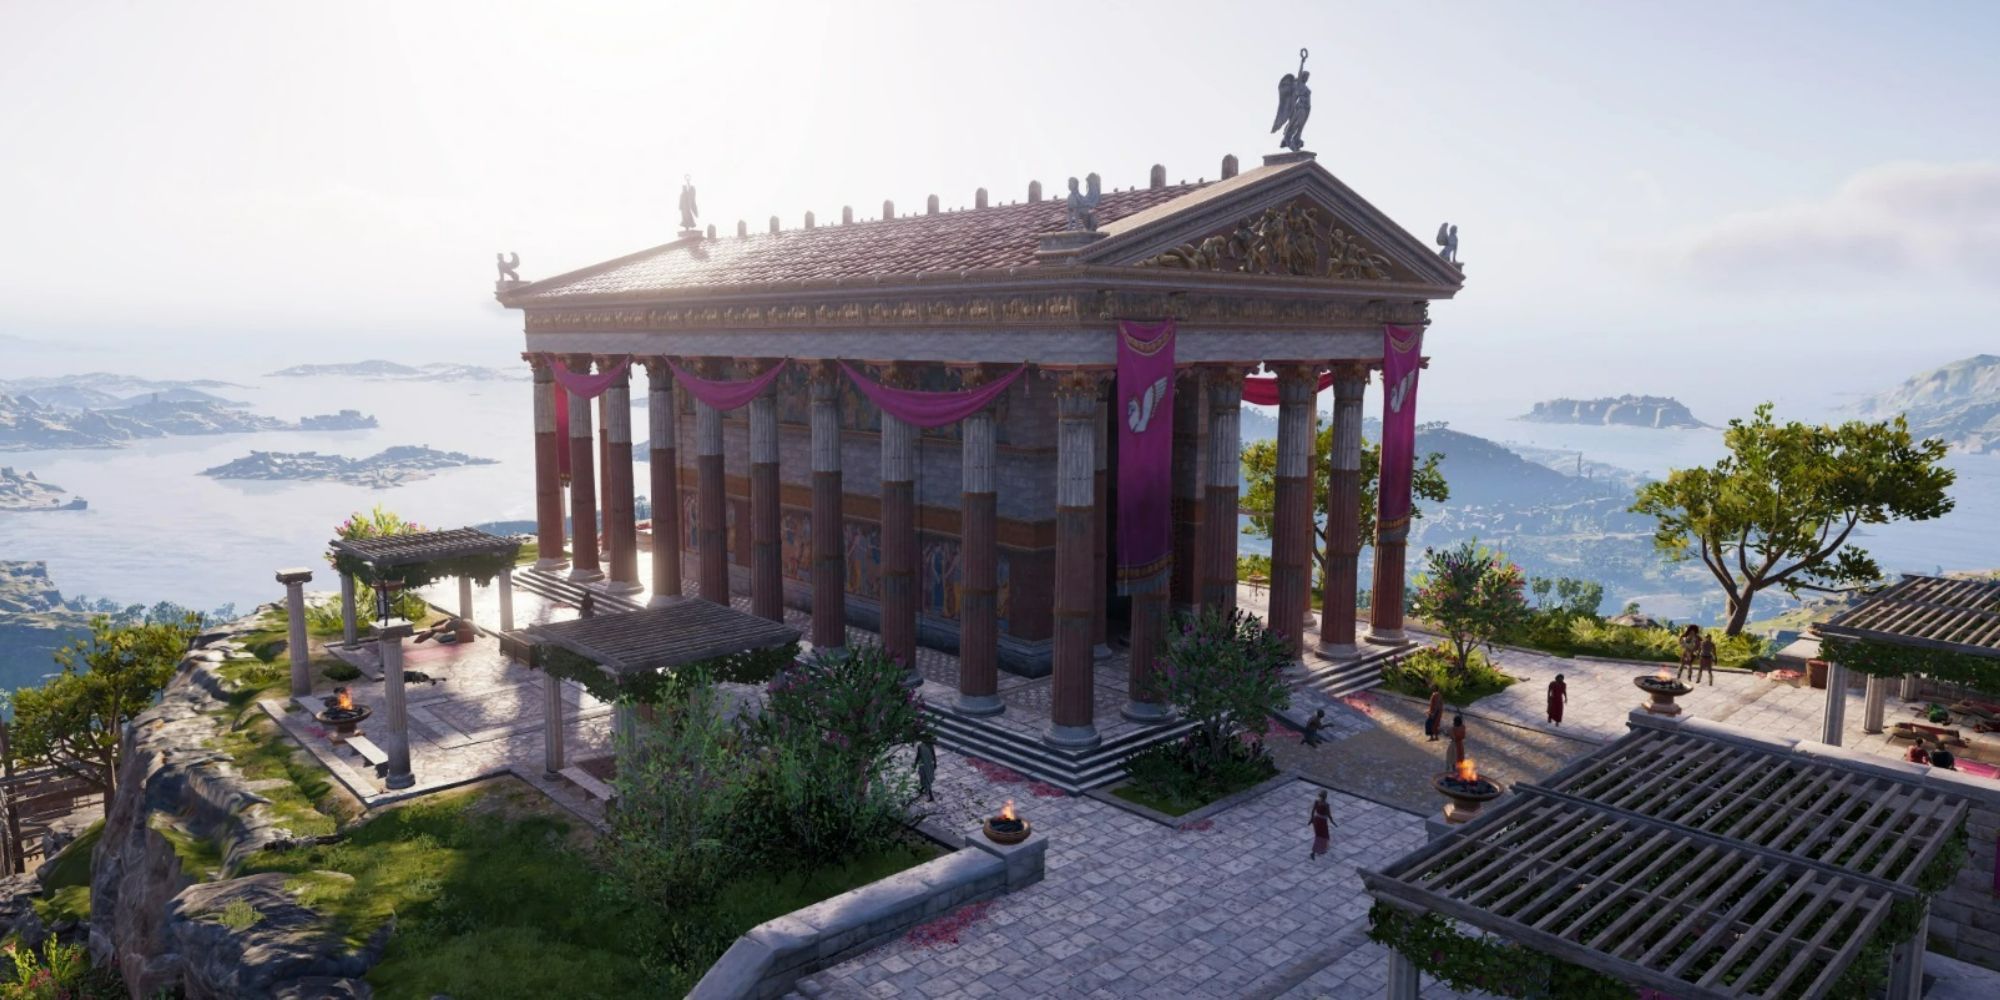 Assassins Creed Odyssey - Acropolis of Akrokorinth